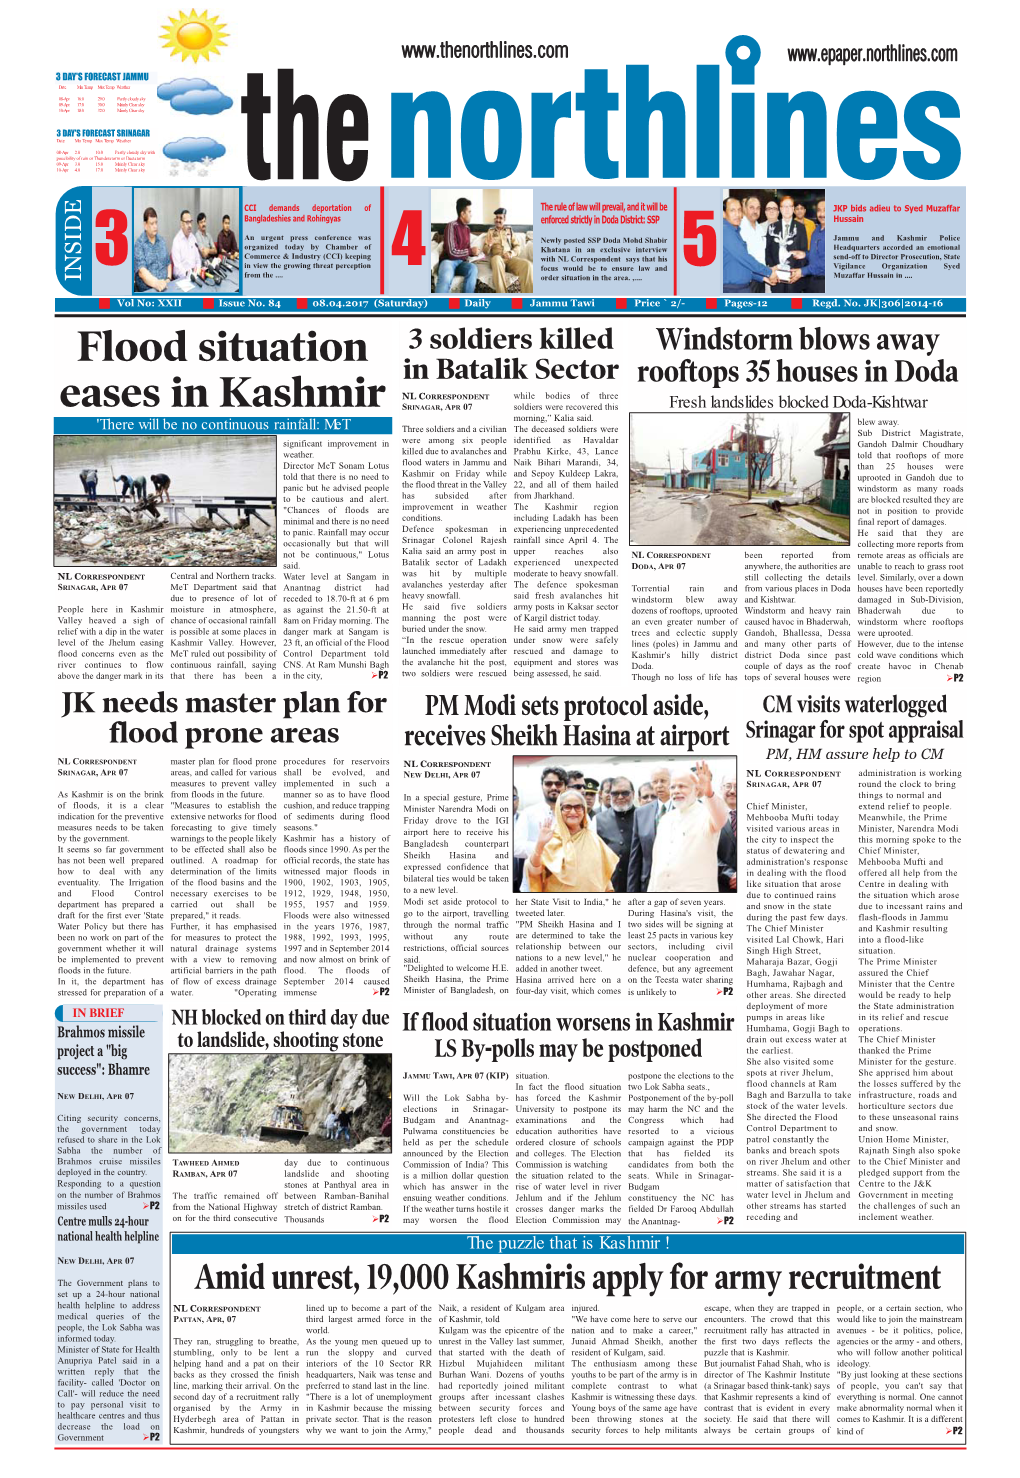 Flood Situation Eases in Kashmir